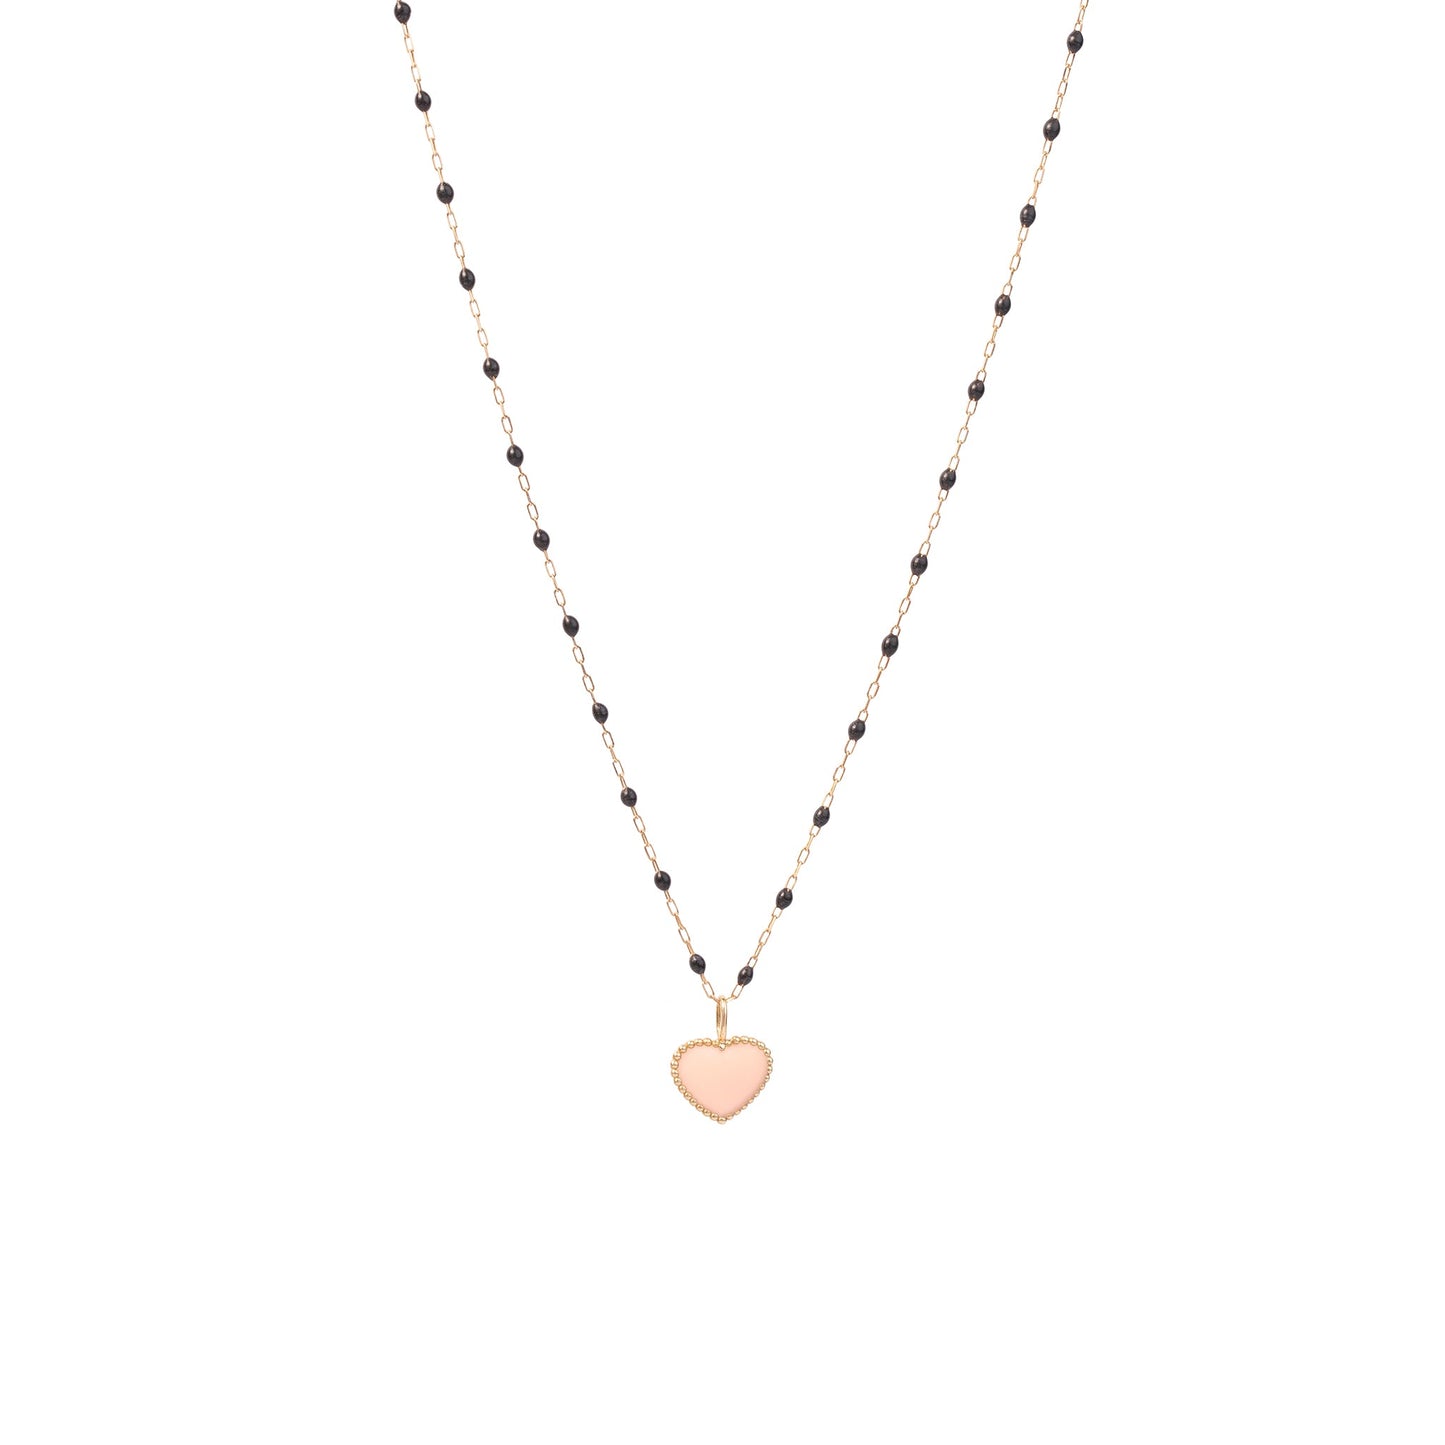 The Pink Enamel heart necklace - Oria.jewelry